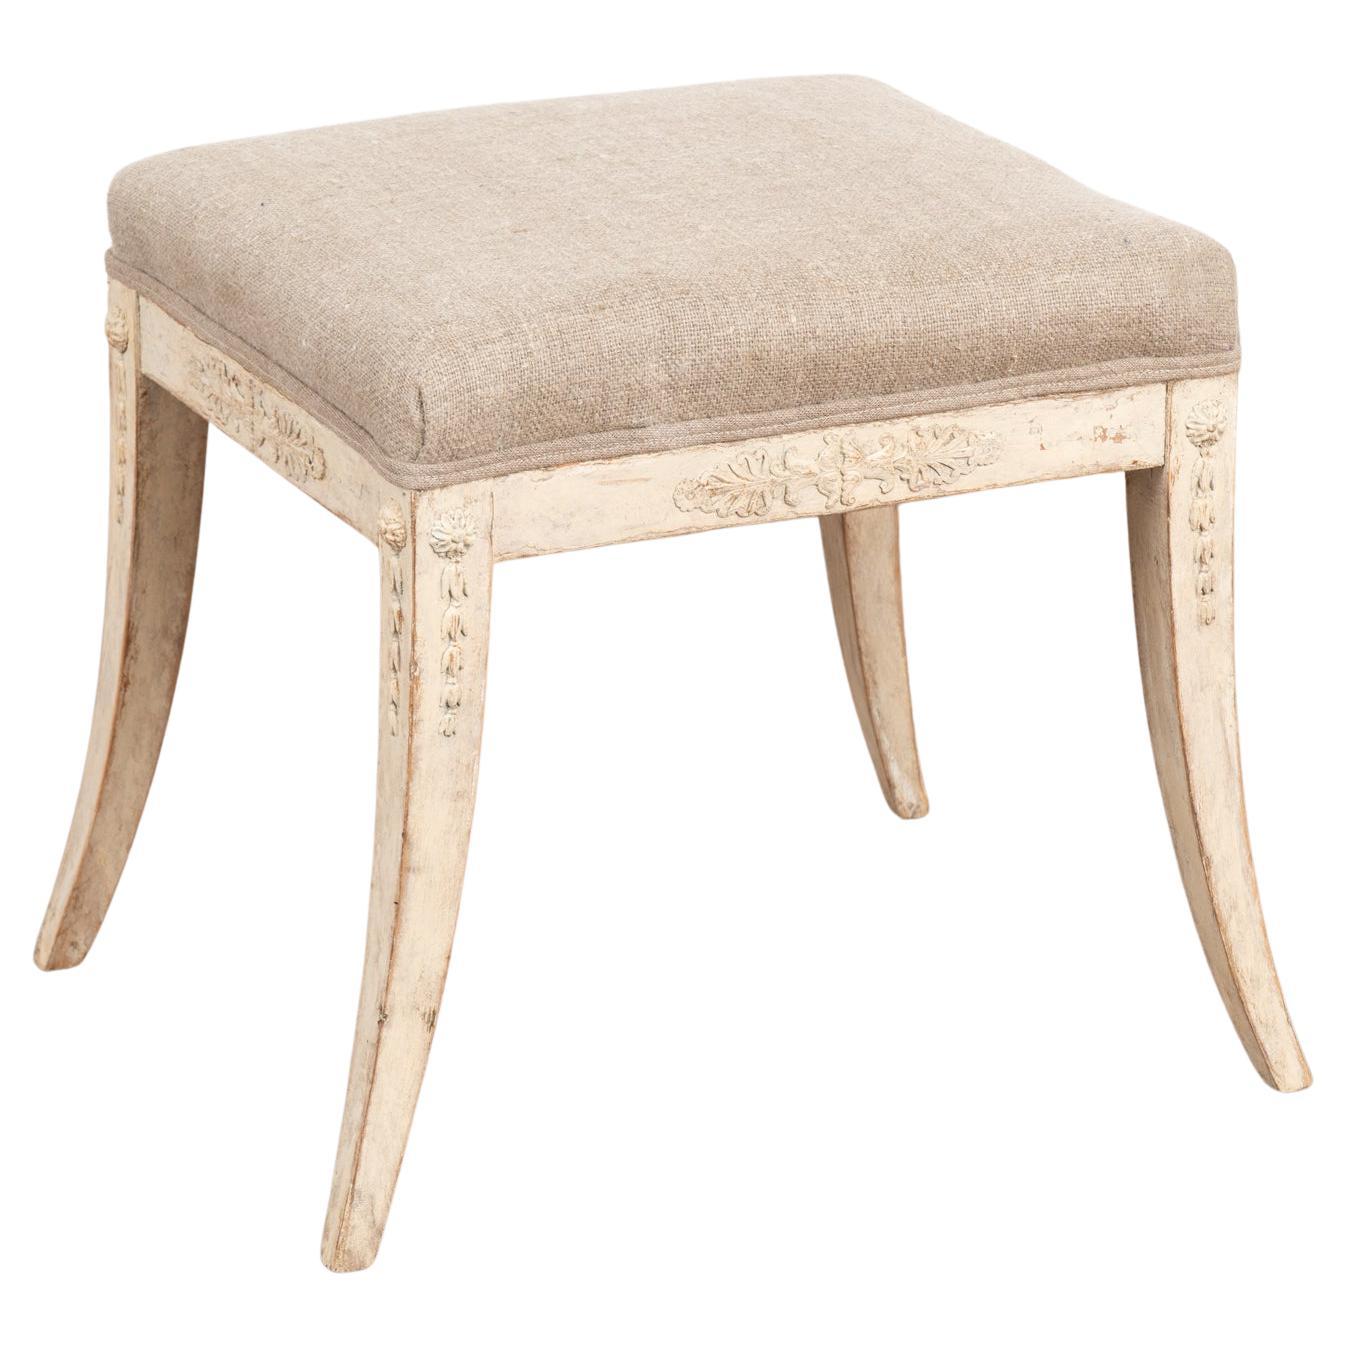 White Swedish Gustavian Stool With Saber Legs, circa 1840 For Sale